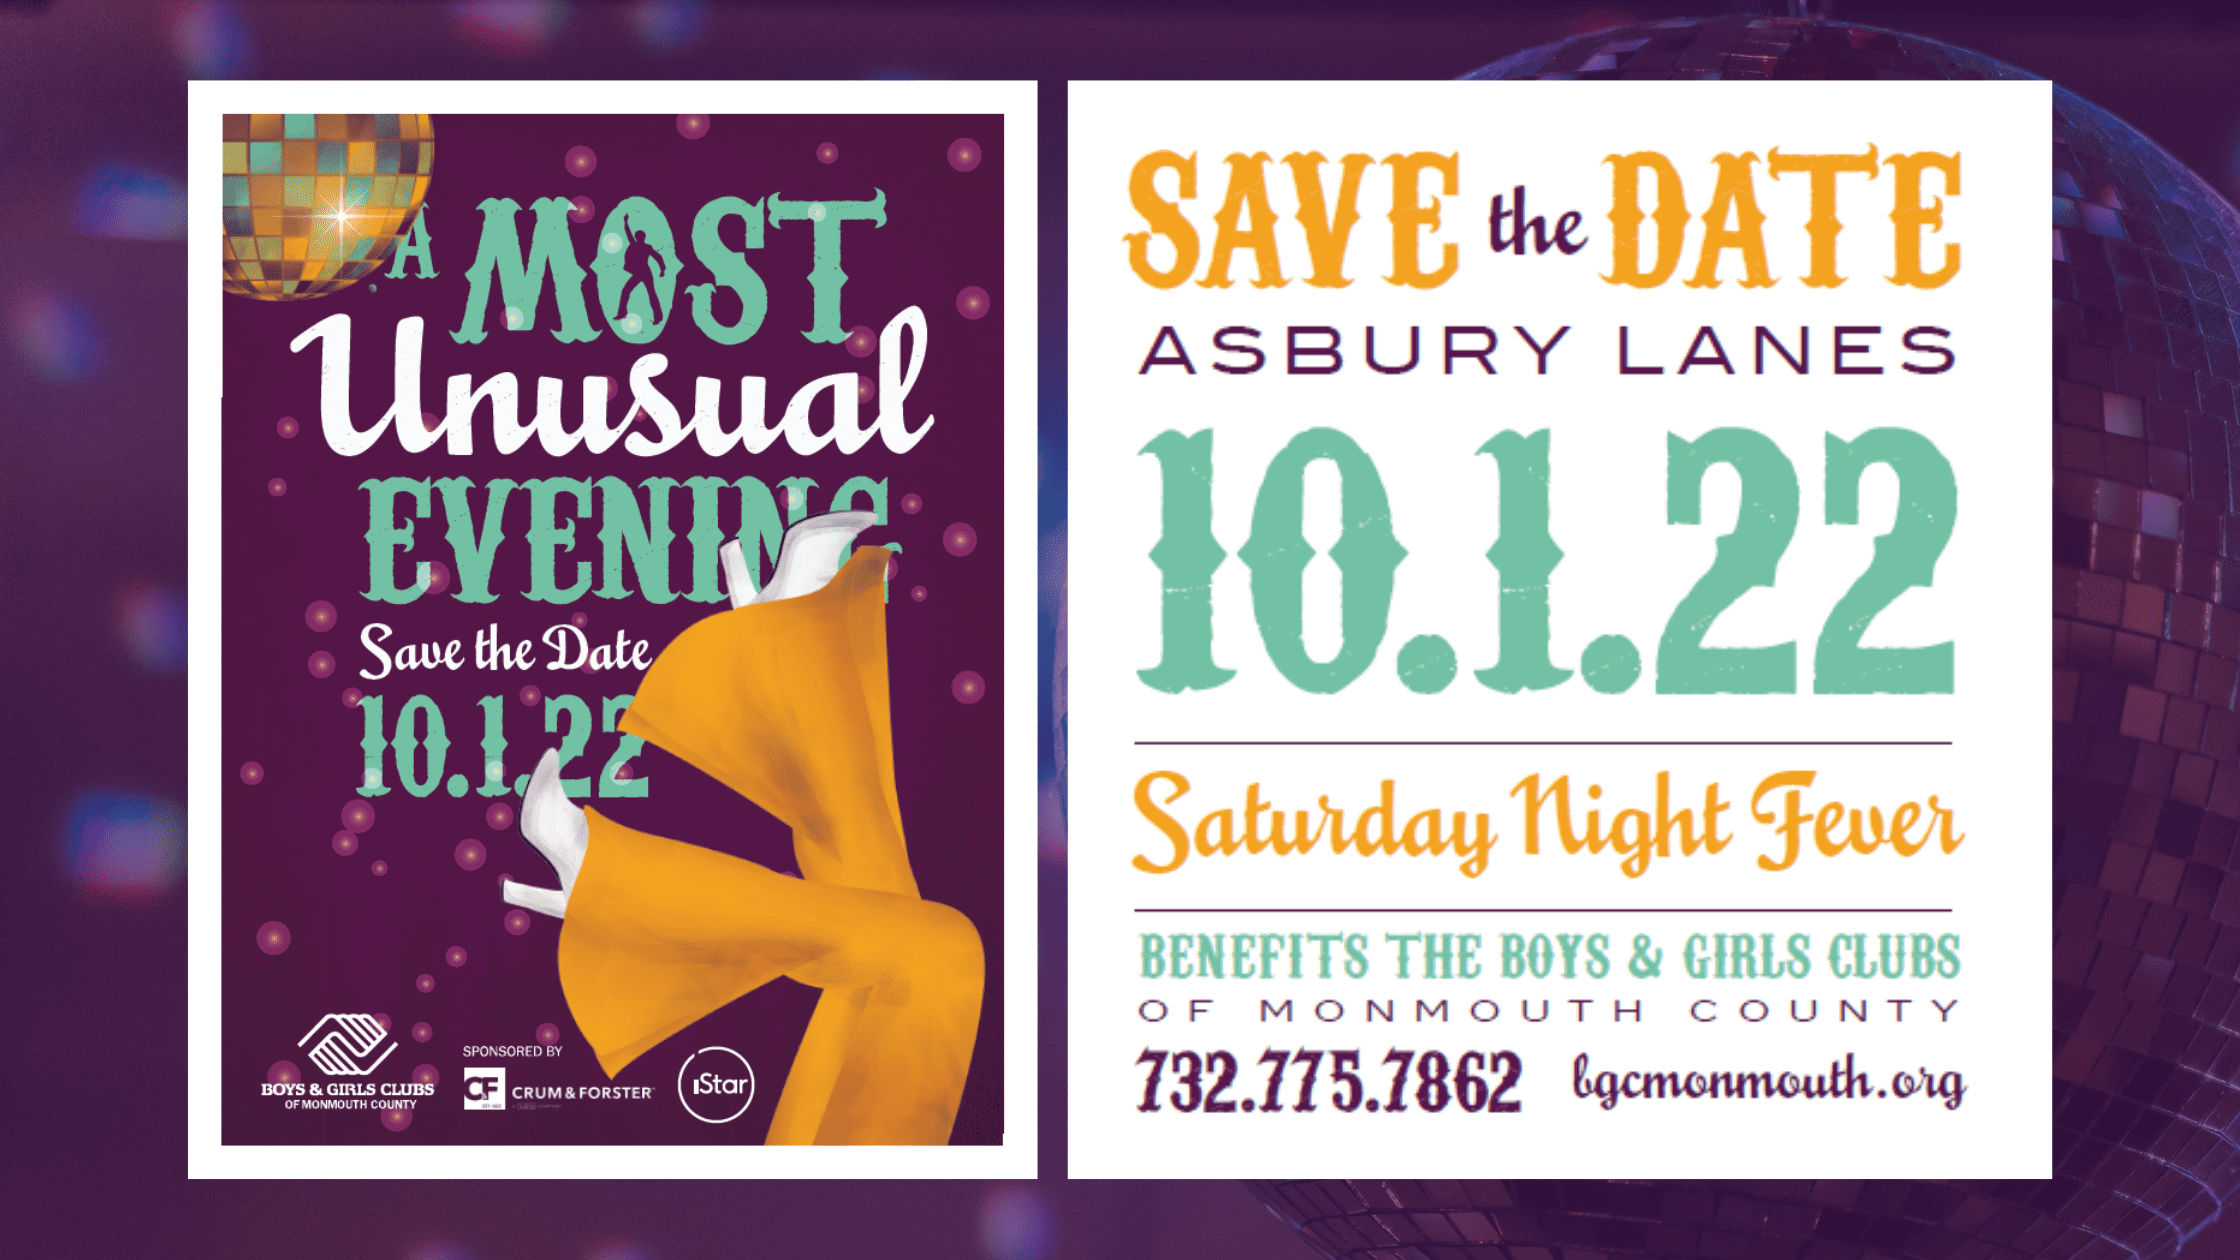 Save the Date: A Most Unusual Evening October 1, 2022